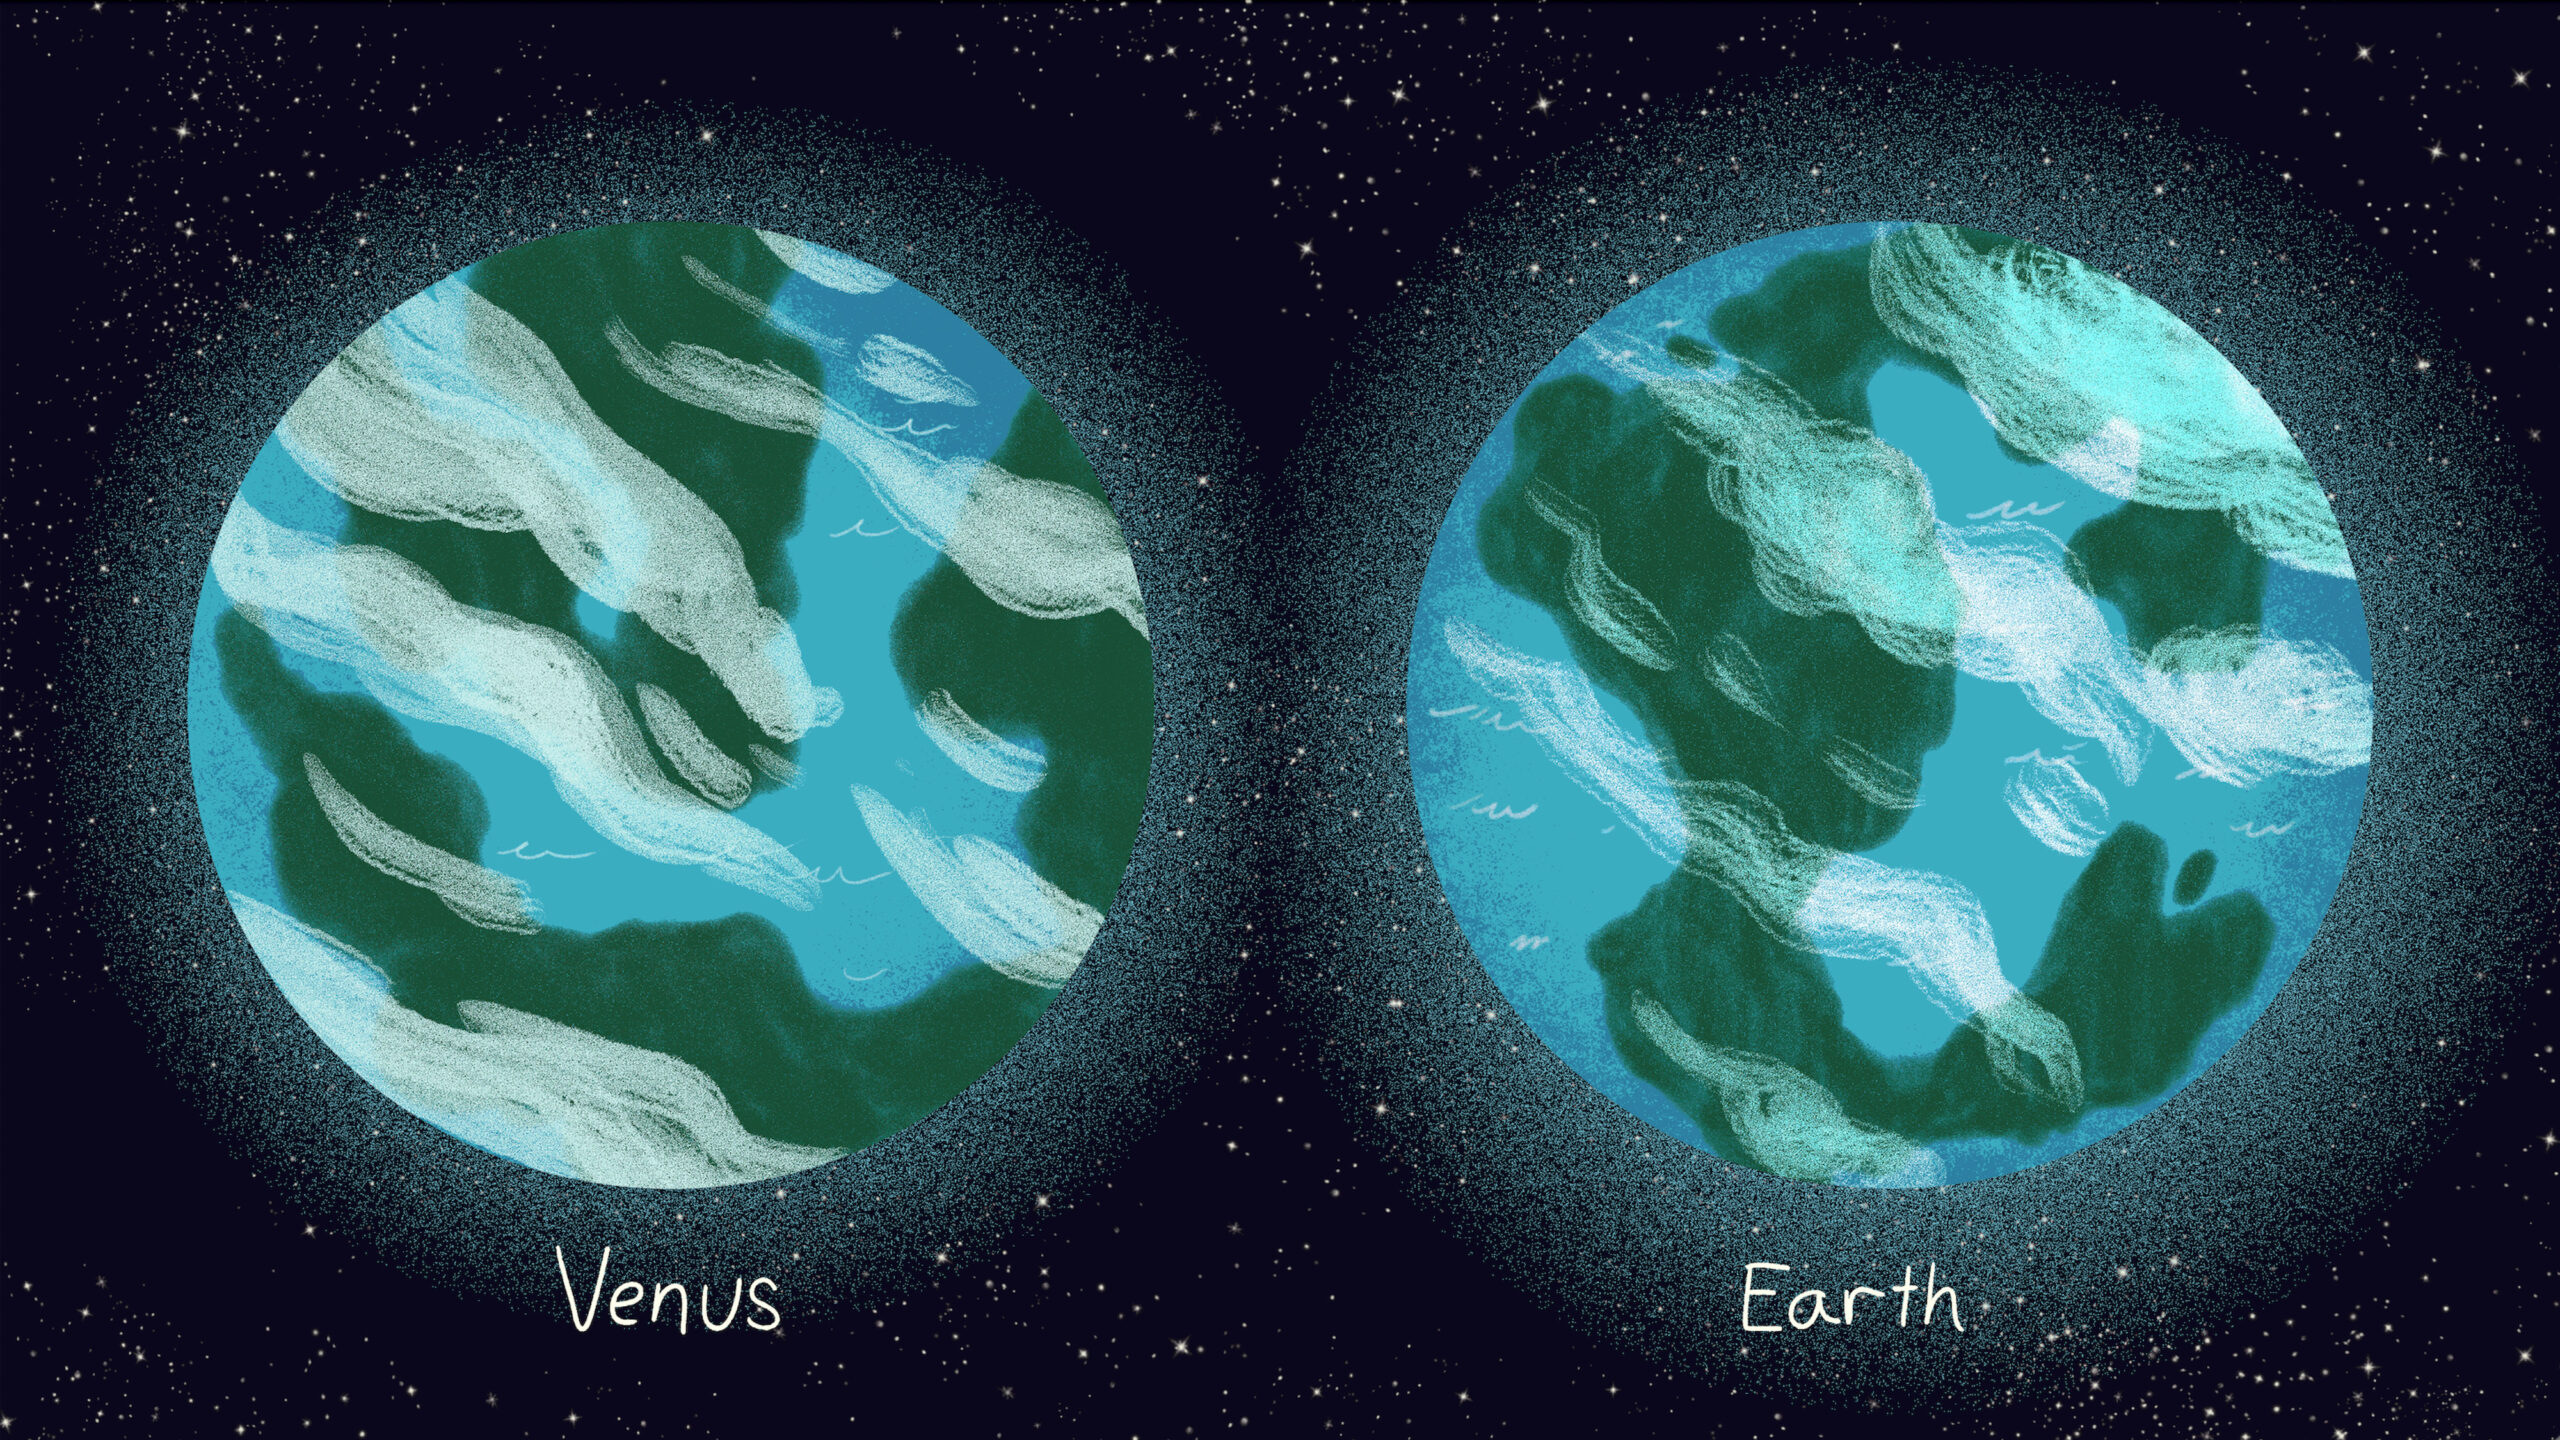 Venus and Earth used to look like ‘twin’ planets. What happened?